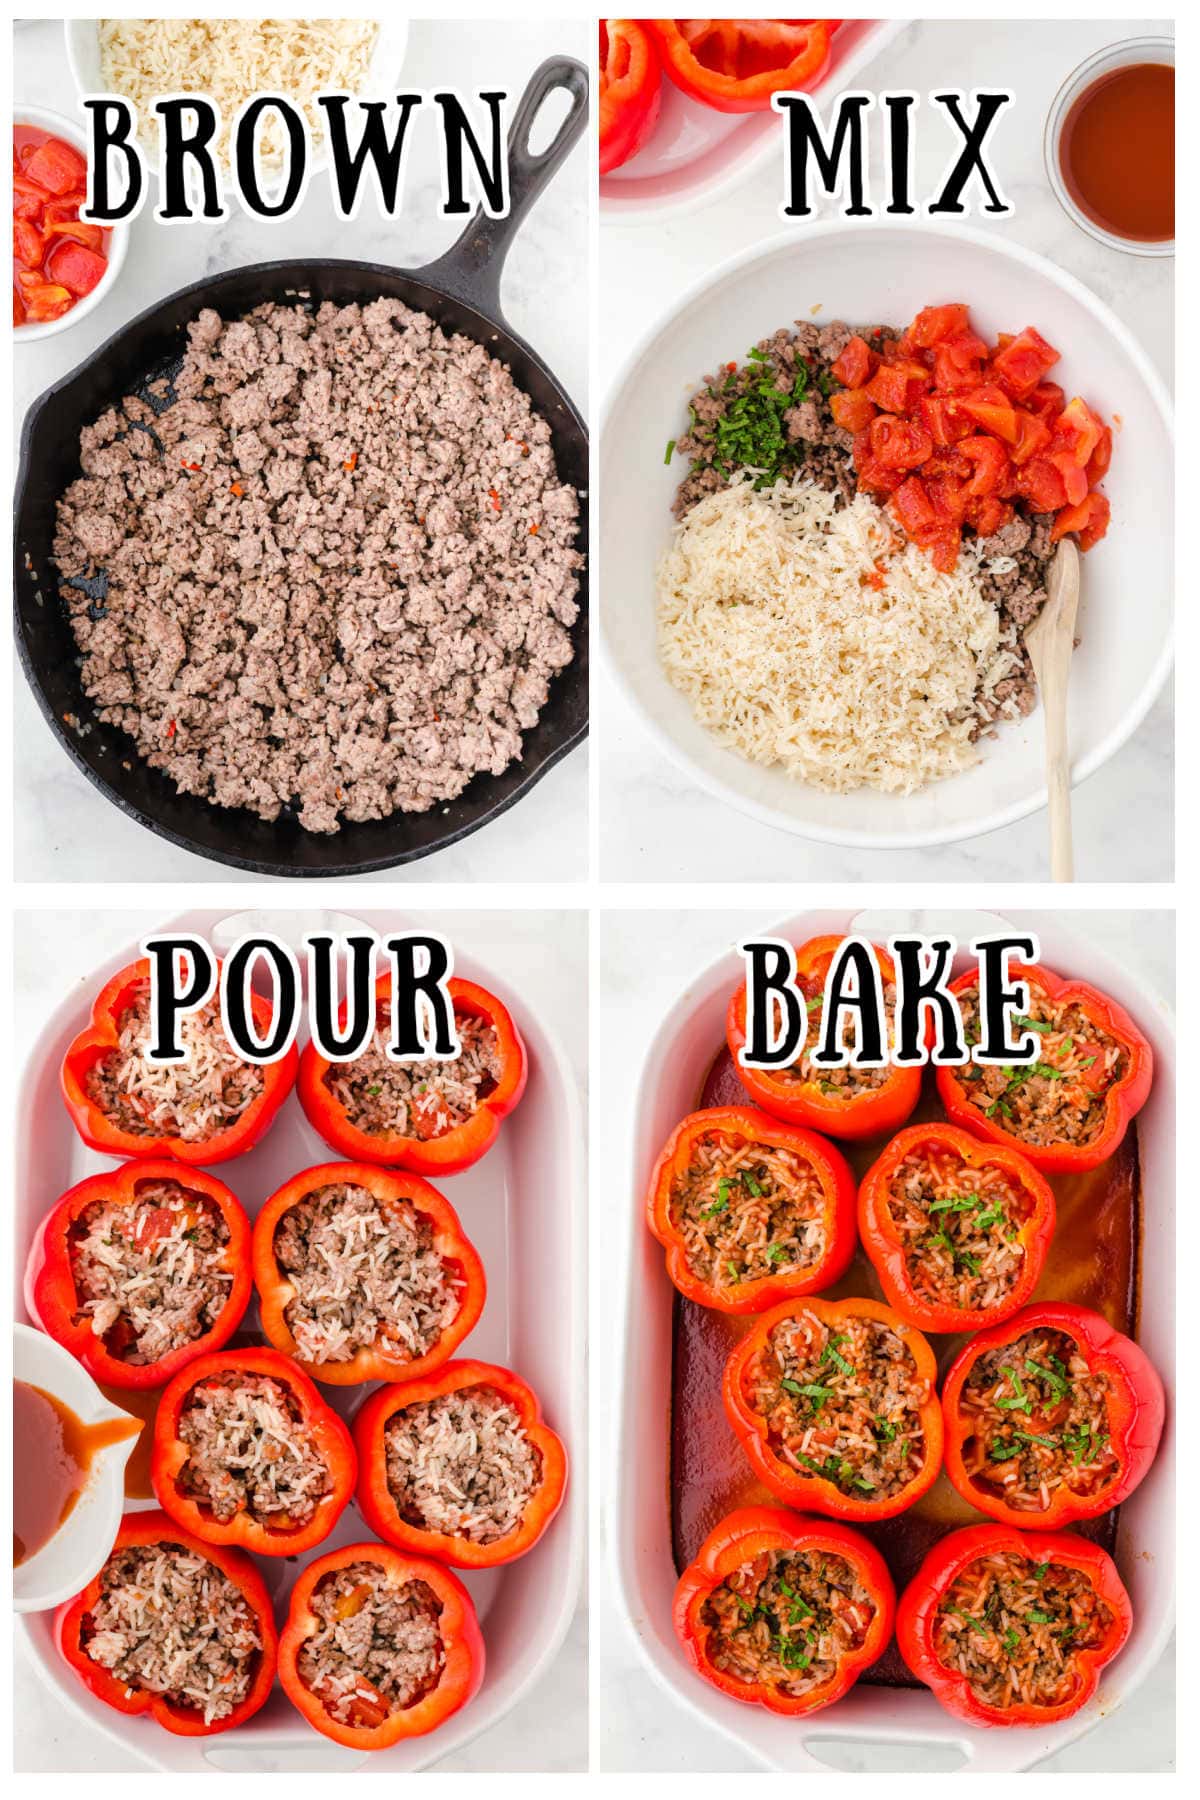 Step by step images showing how to make stuffed peppers.